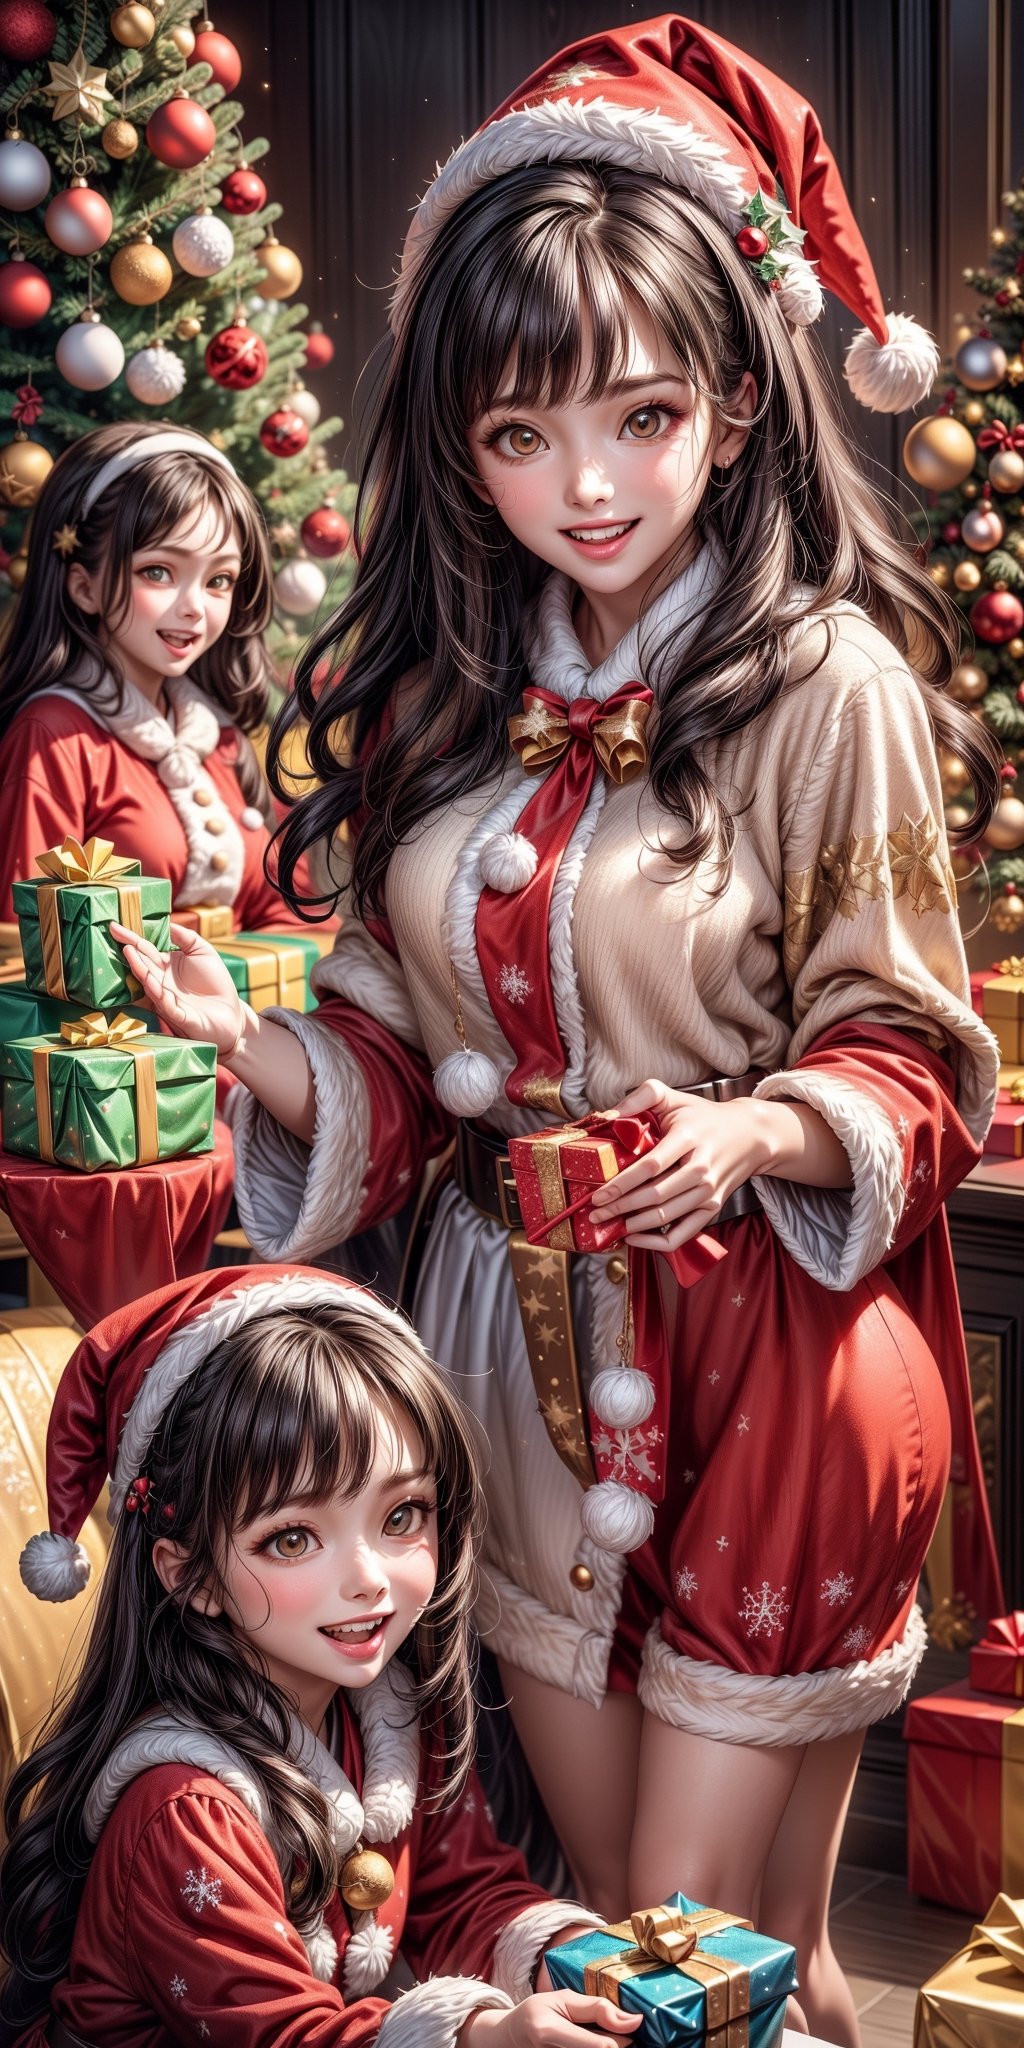 (very beautiful british child), (beautiful smile), (loli_child_small_little:1.5), (of course on the face), navel,  (Red and white Santa Claus costume for girl, dress, hat, belt, hooded cape and a pair of gloves. The long dress is designed with long sleeves, white plush trim, high waist and white plush trim, which is full of Christmas atmosphere:1.7), (smiling:1.3), thin waist, wide pelvis, athletic body, slim body, hourglass figure, perfect hands, pretty eyes, pretty face, very long hair, living room by the fireplace background,

(Imagine a dynamic scene with two happy and fun girls, playing "Gift Wrapping Challenge":1.9). You can see a lit fireplace, a very beautiful white cat sleeping near it. a very beautiful and colorful Christmas tree with many decorations, a small manger next to it.
Choose a background that complements your character, creating a cinematic masterpiece with high realism and top-notch image quality. 

PNG image format, sharp lines and edges, solid blocks of colors, 300+ dpi dots per inch, 16k ultra high definition, photorealistic: 1.5, photography, masterpiece, realistic, realism, photorealism, high contrast, digital art trending on Artstation ultra high definition. realistic detailed, detailed, skin texture, hyper detailed, realistic skin texture, facial features, best quality, ultra high resolution, high resolution, detailed, raw photo, sharpness, rich lens colors, hyper realistic realistic texture, lighting dramatic, unrealistic motor tendencies, ultra sharp, intricate details, vibrant colors, perfect feet, sexy legs, perfect hands, sexy arms, highly detailed skin, textured skin, defined body features, detailed shadows, narrow waist , big hips, aesthetic, blush, front view ,Santa Claus,Christmas